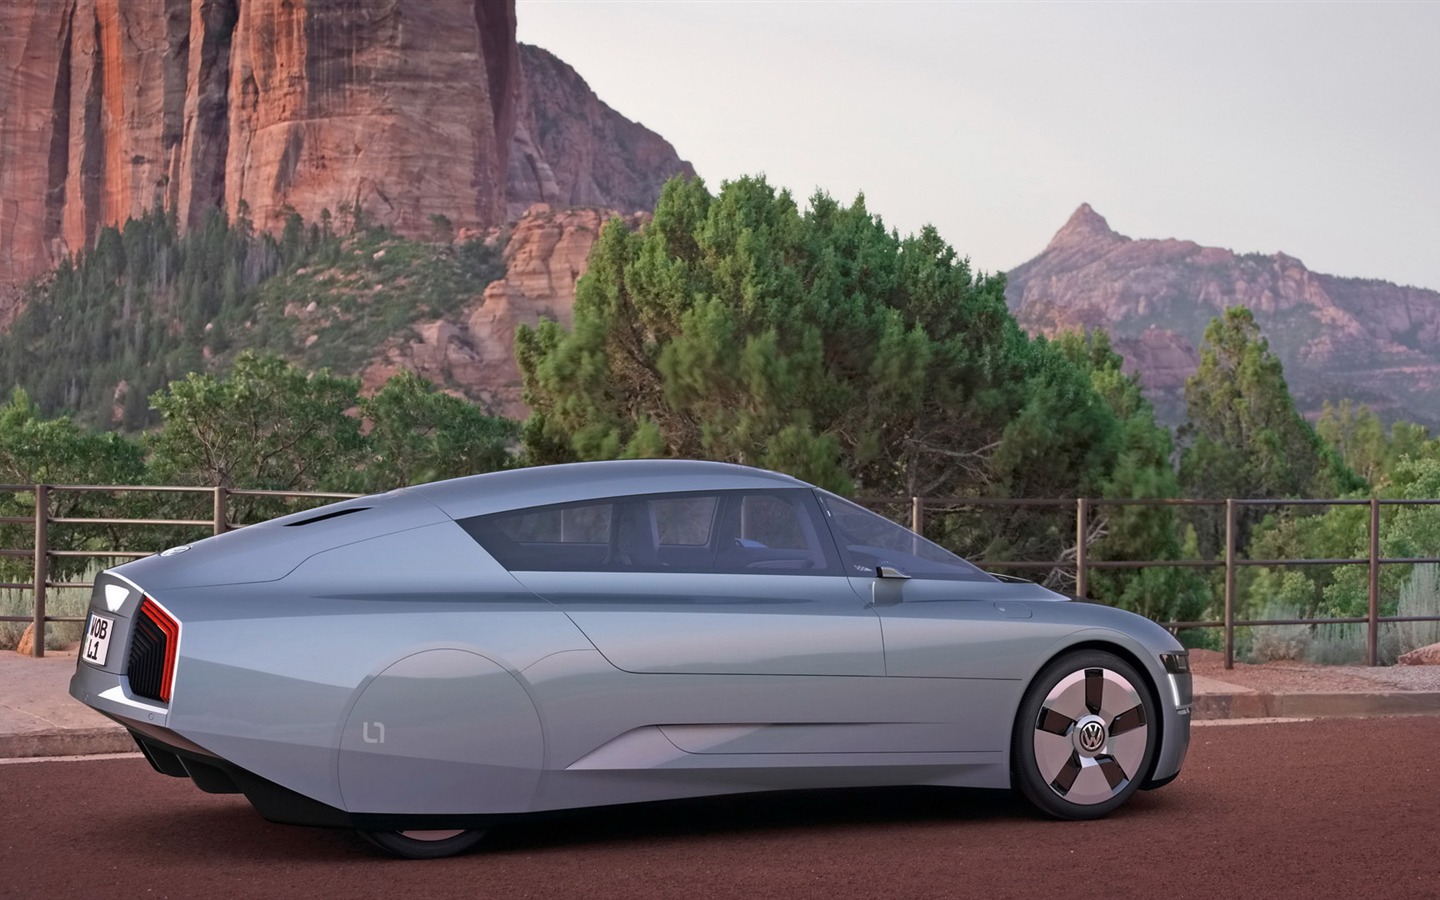 Volkswagen L1 Tapety Concept Car #20 - 1440x900